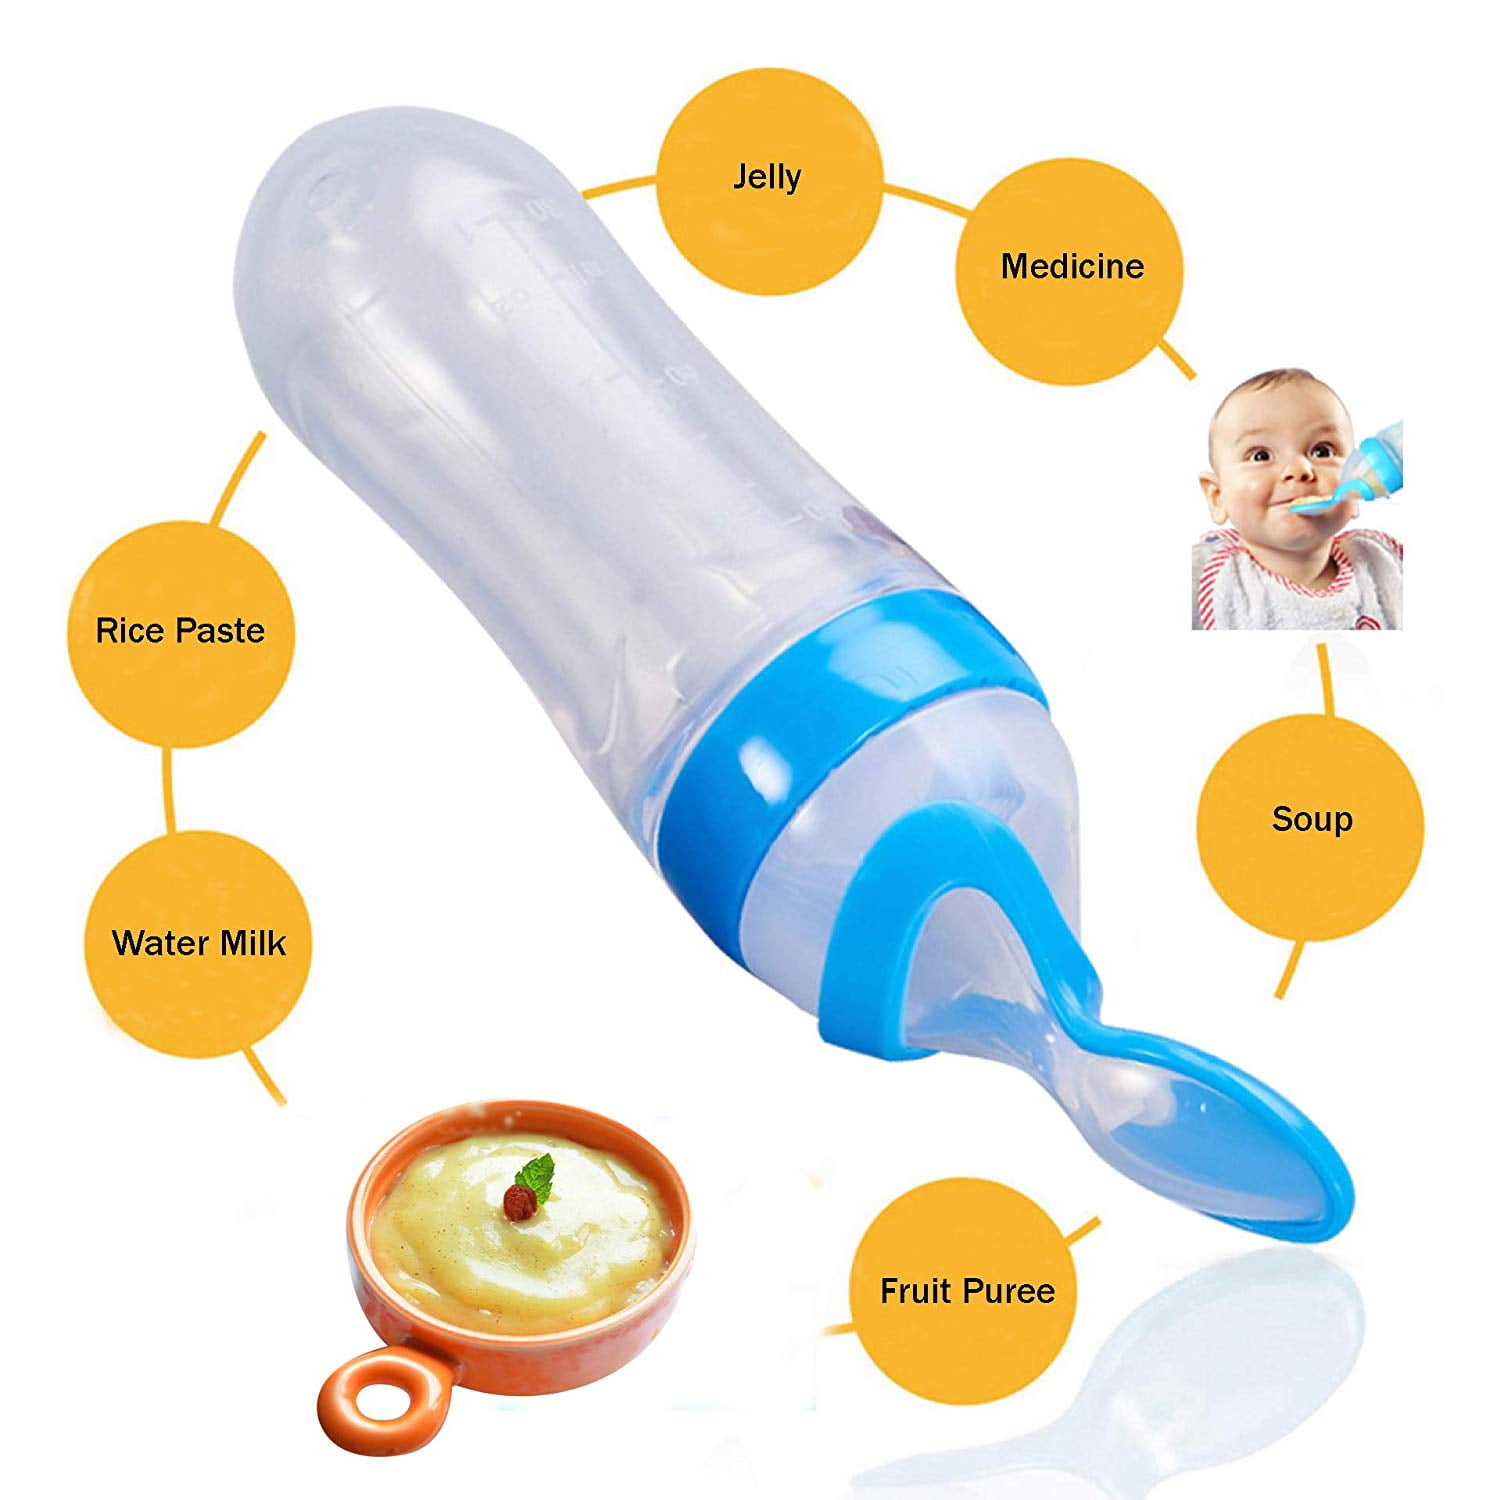 90ml Silicone Feeding Bottle with Spoon for Infant Baby Newborn Toddler  Food Rice Cereal Feeder Bottles - Walmart.com